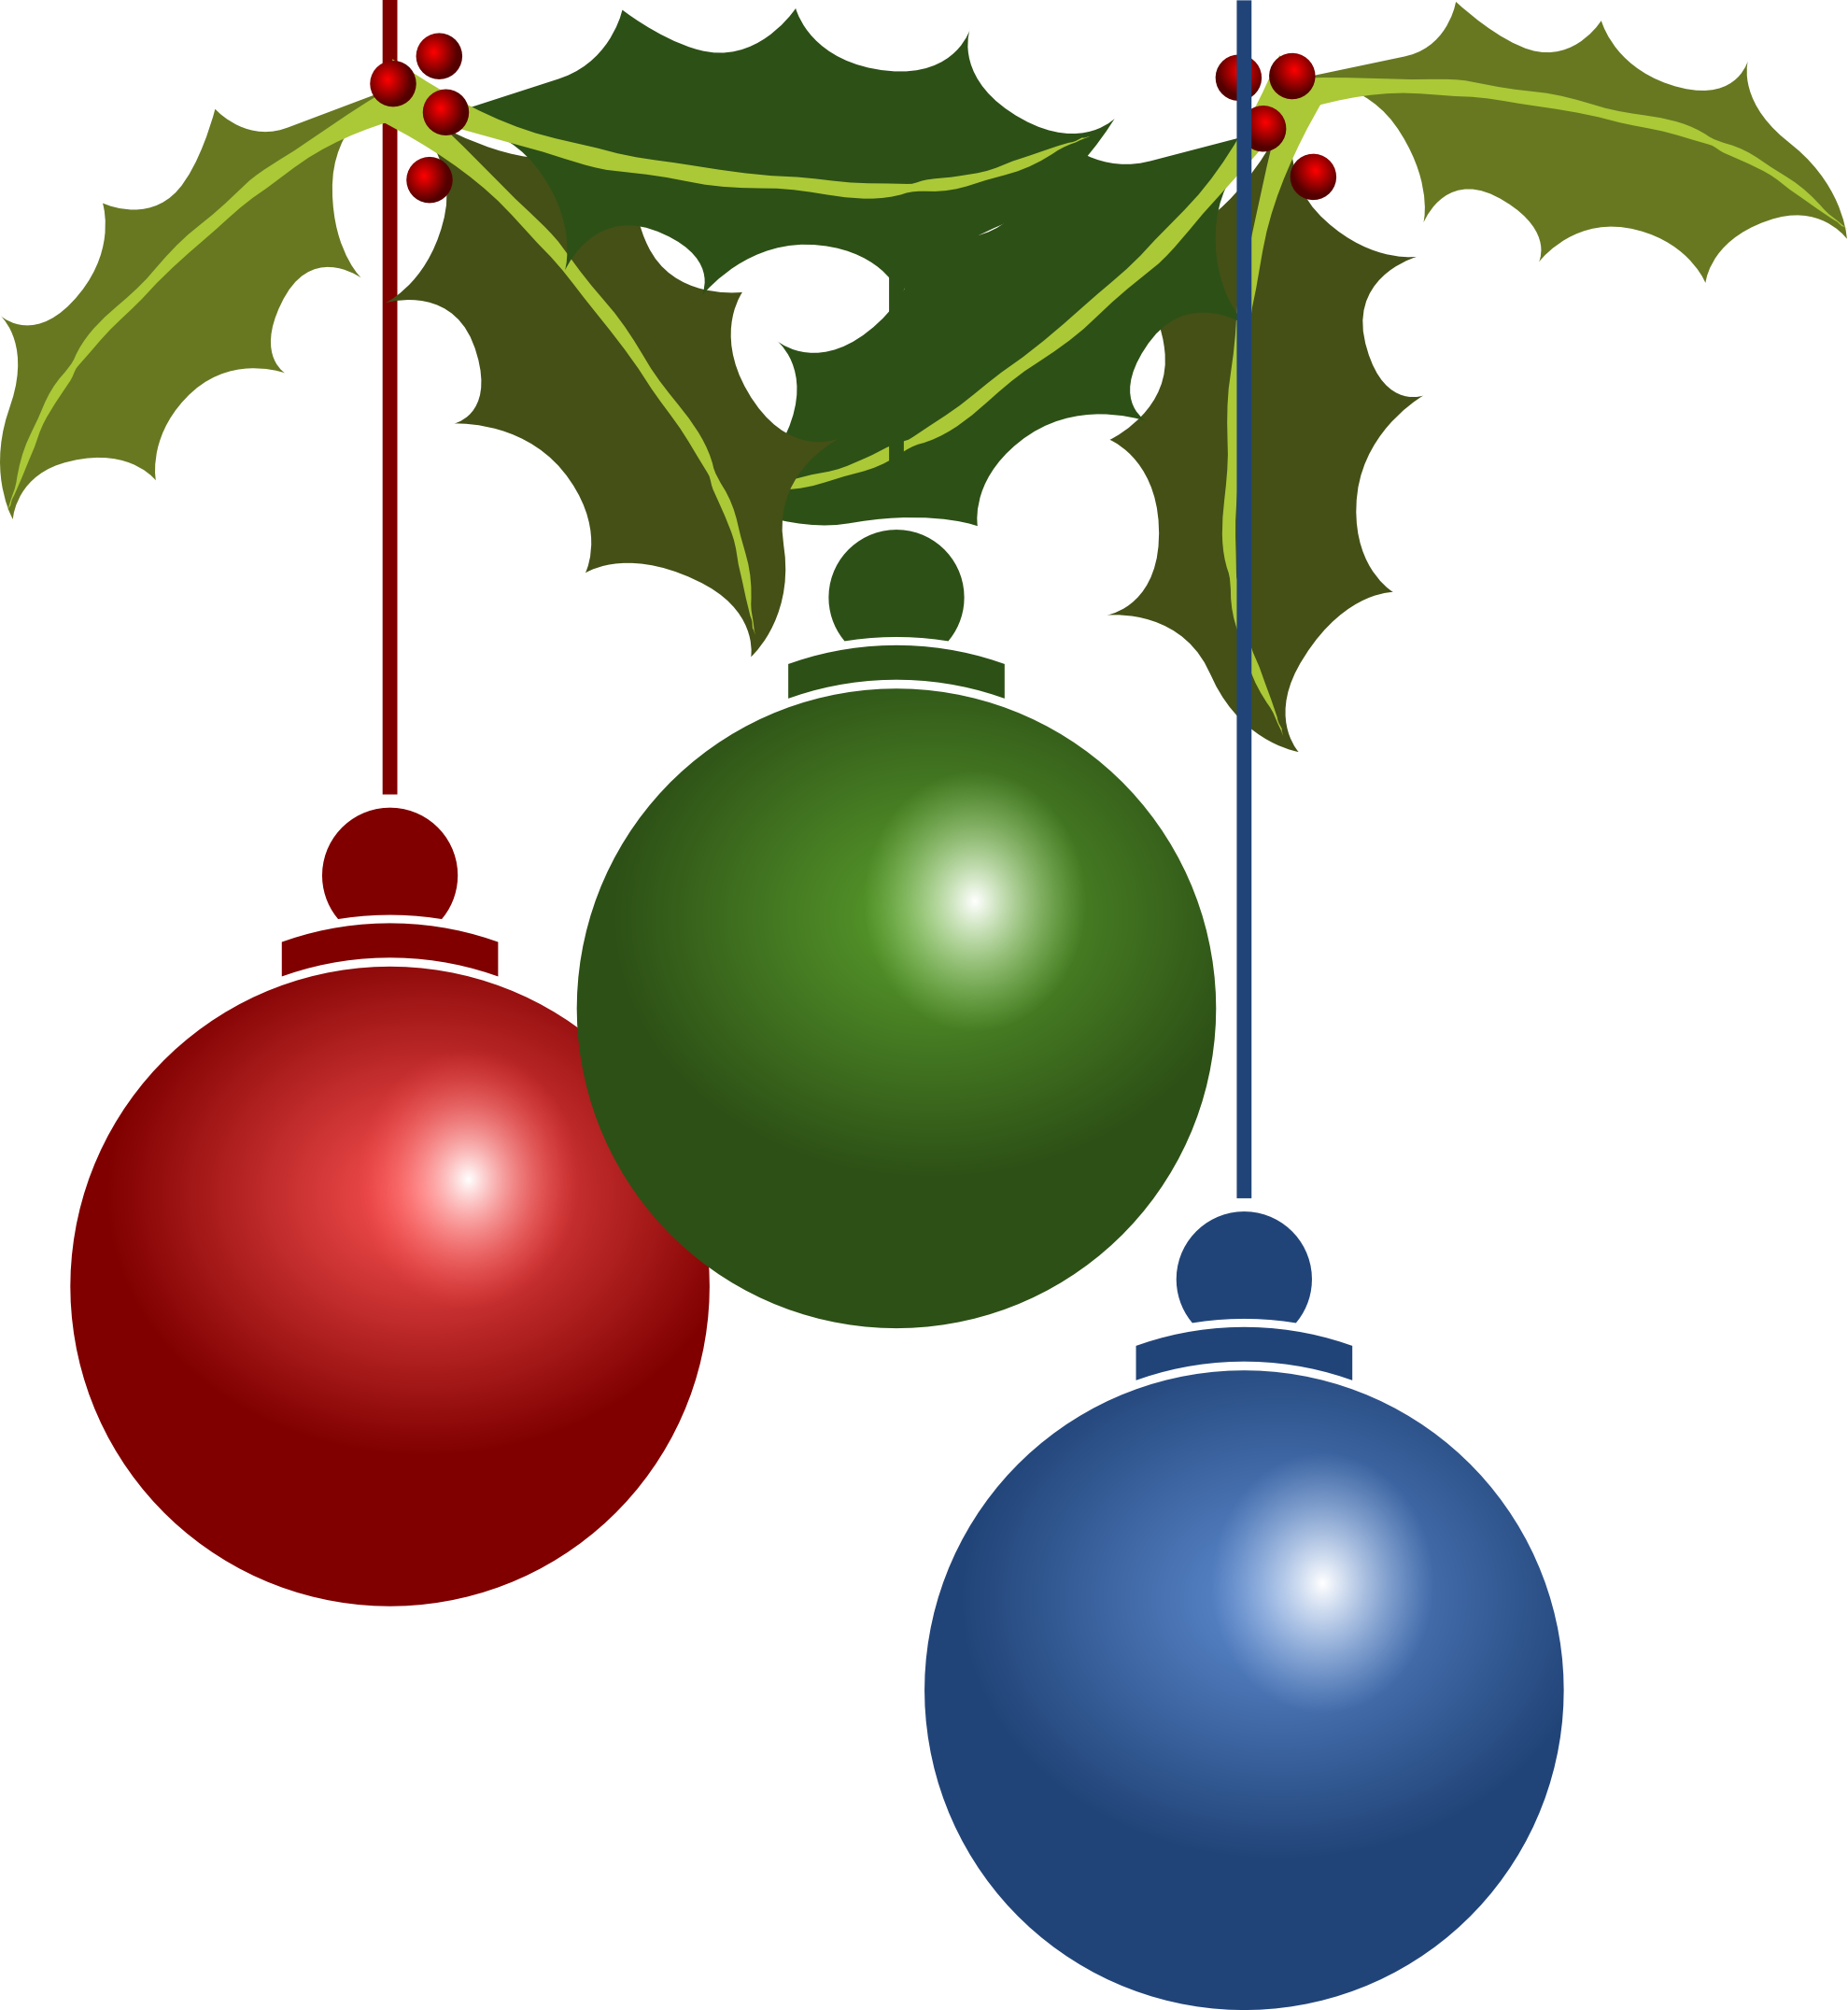 holiday clipart free - Holiday Clipart For Free